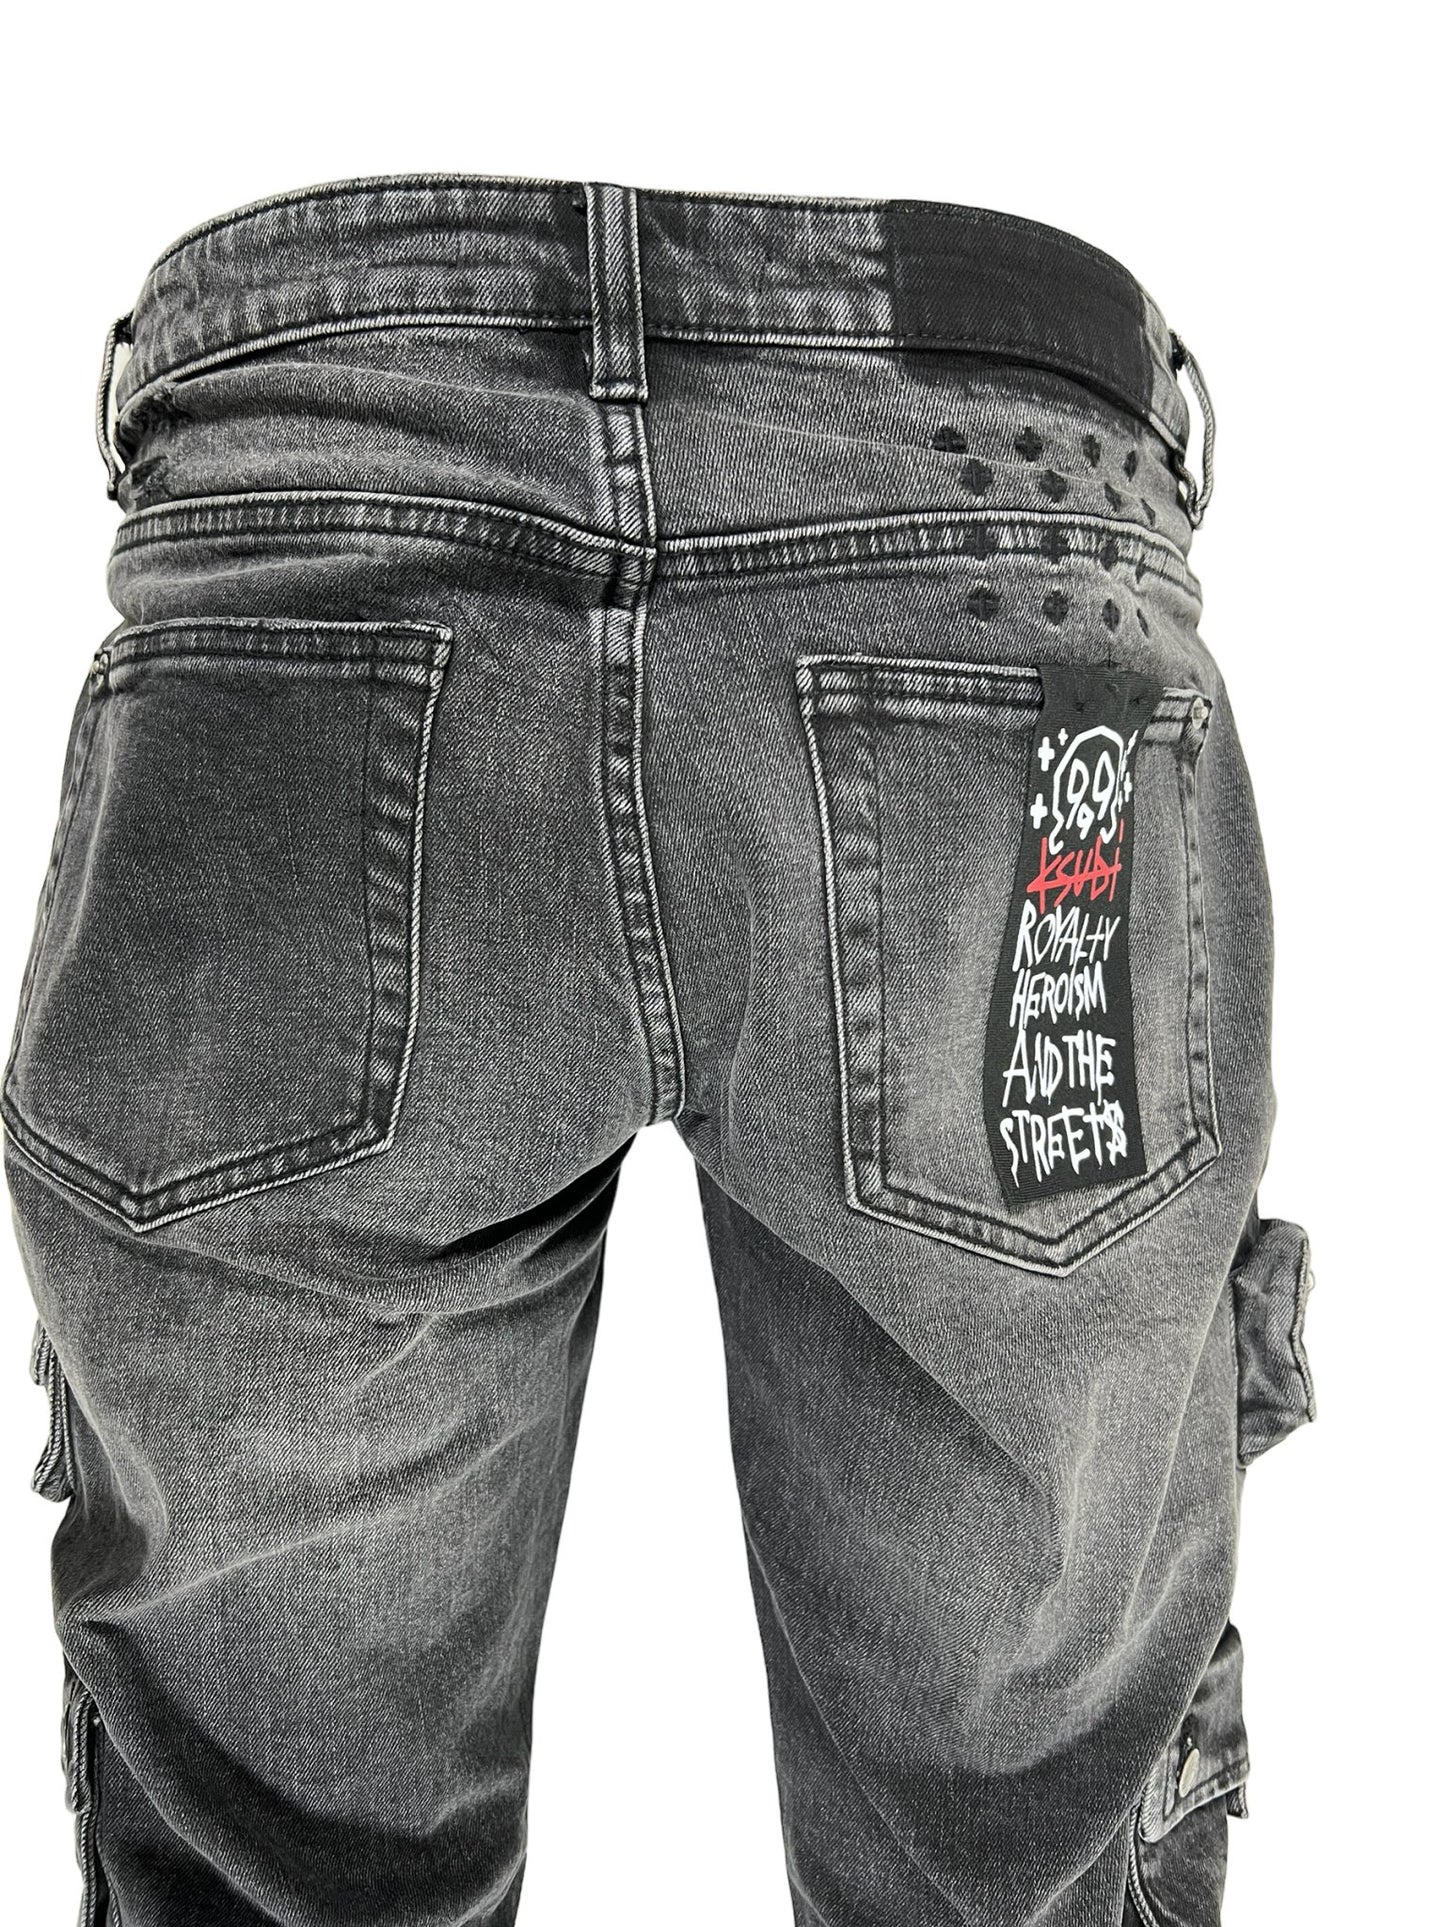 The back view of a pair of men's Ksubi 999 Bronko Cargo jeans featuring embroidery branding.